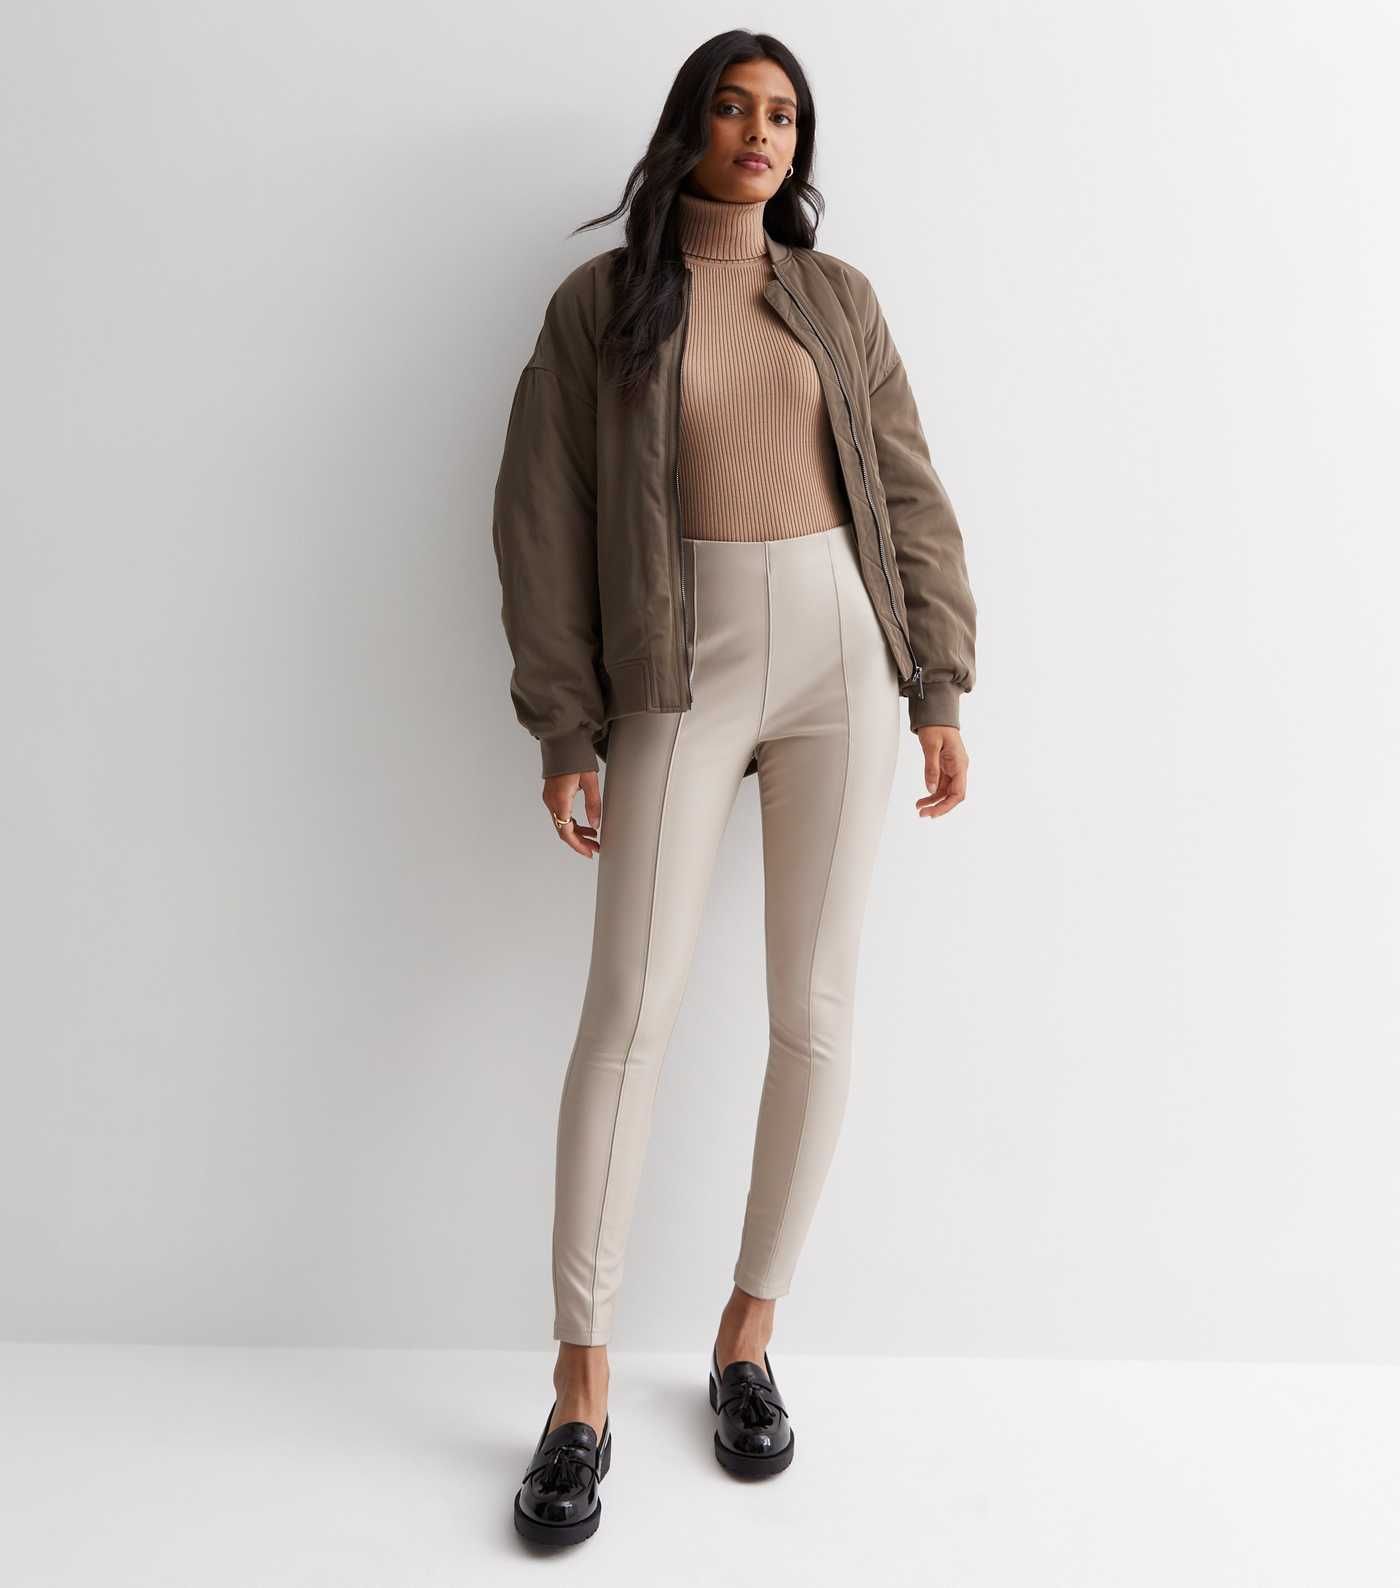 Off White Leather-Look High Waist Leggings
						
						Add to Saved Items
						Remove from Save... | New Look (UK)